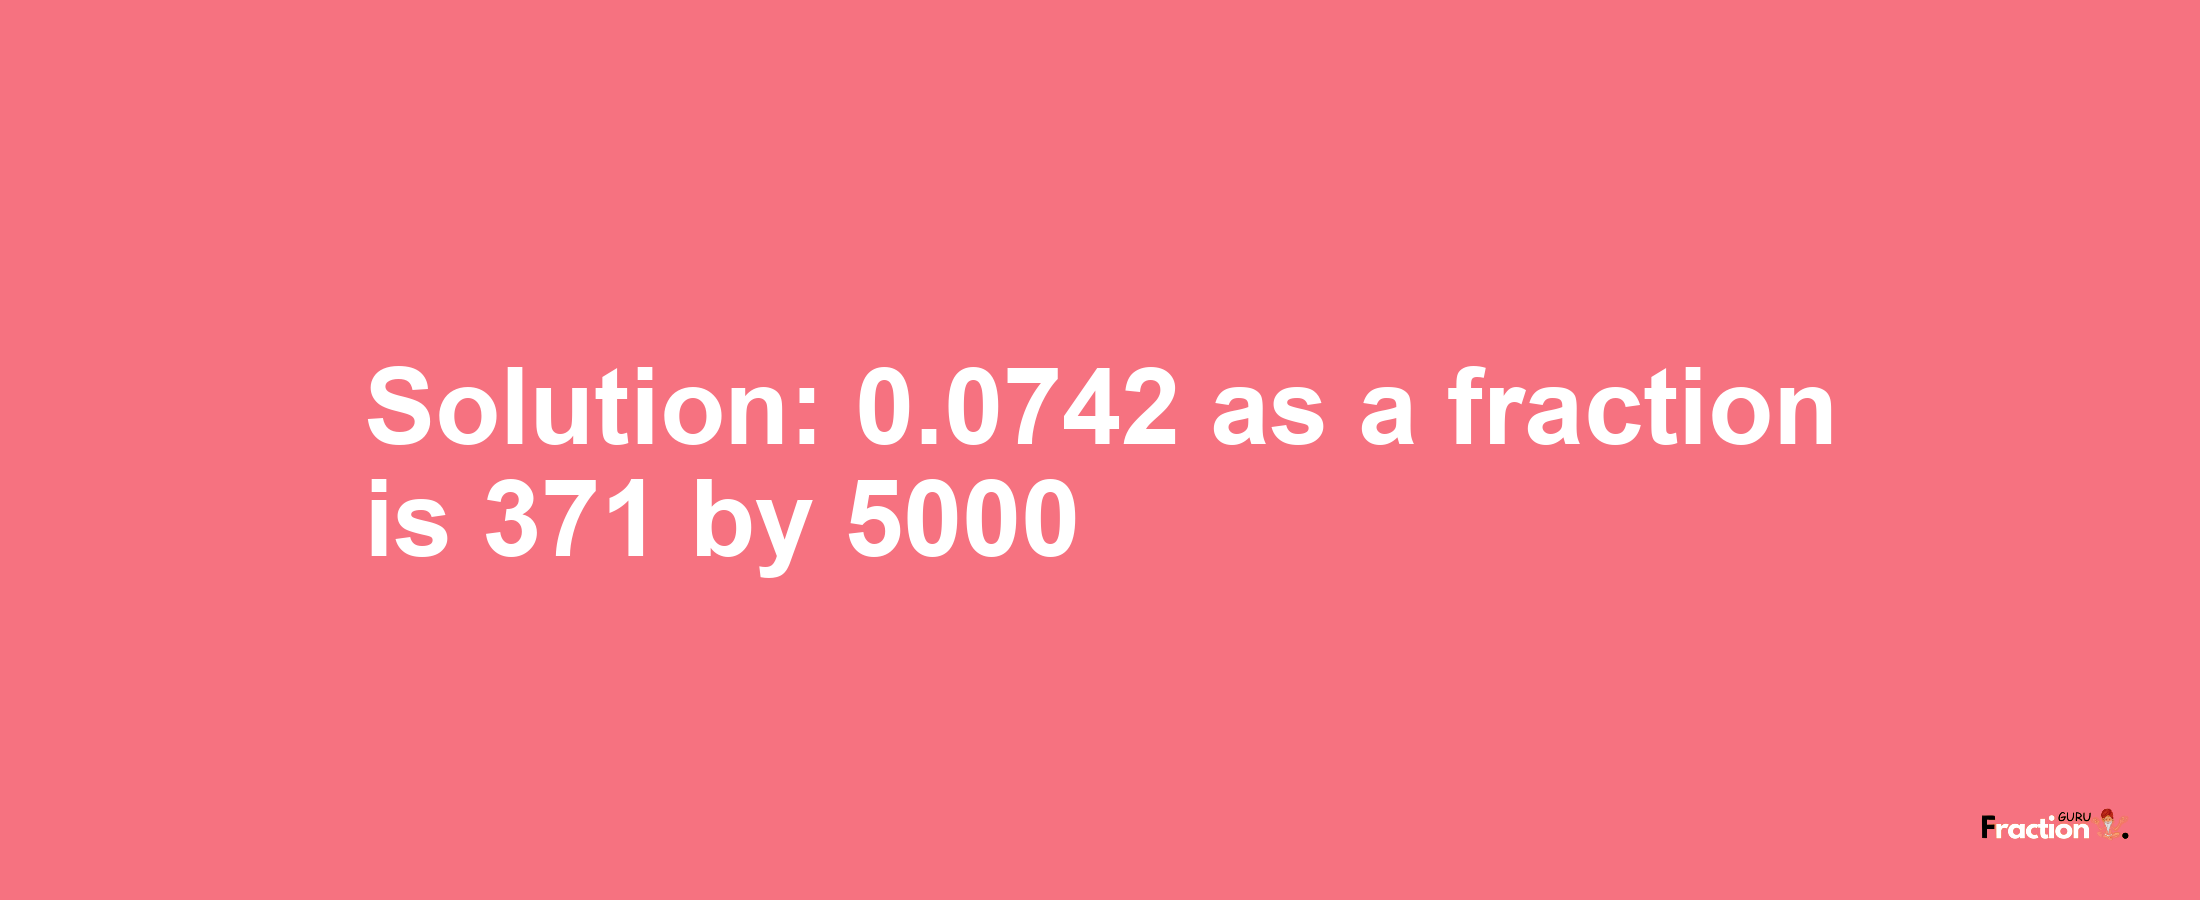 Solution:0.0742 as a fraction is 371/5000